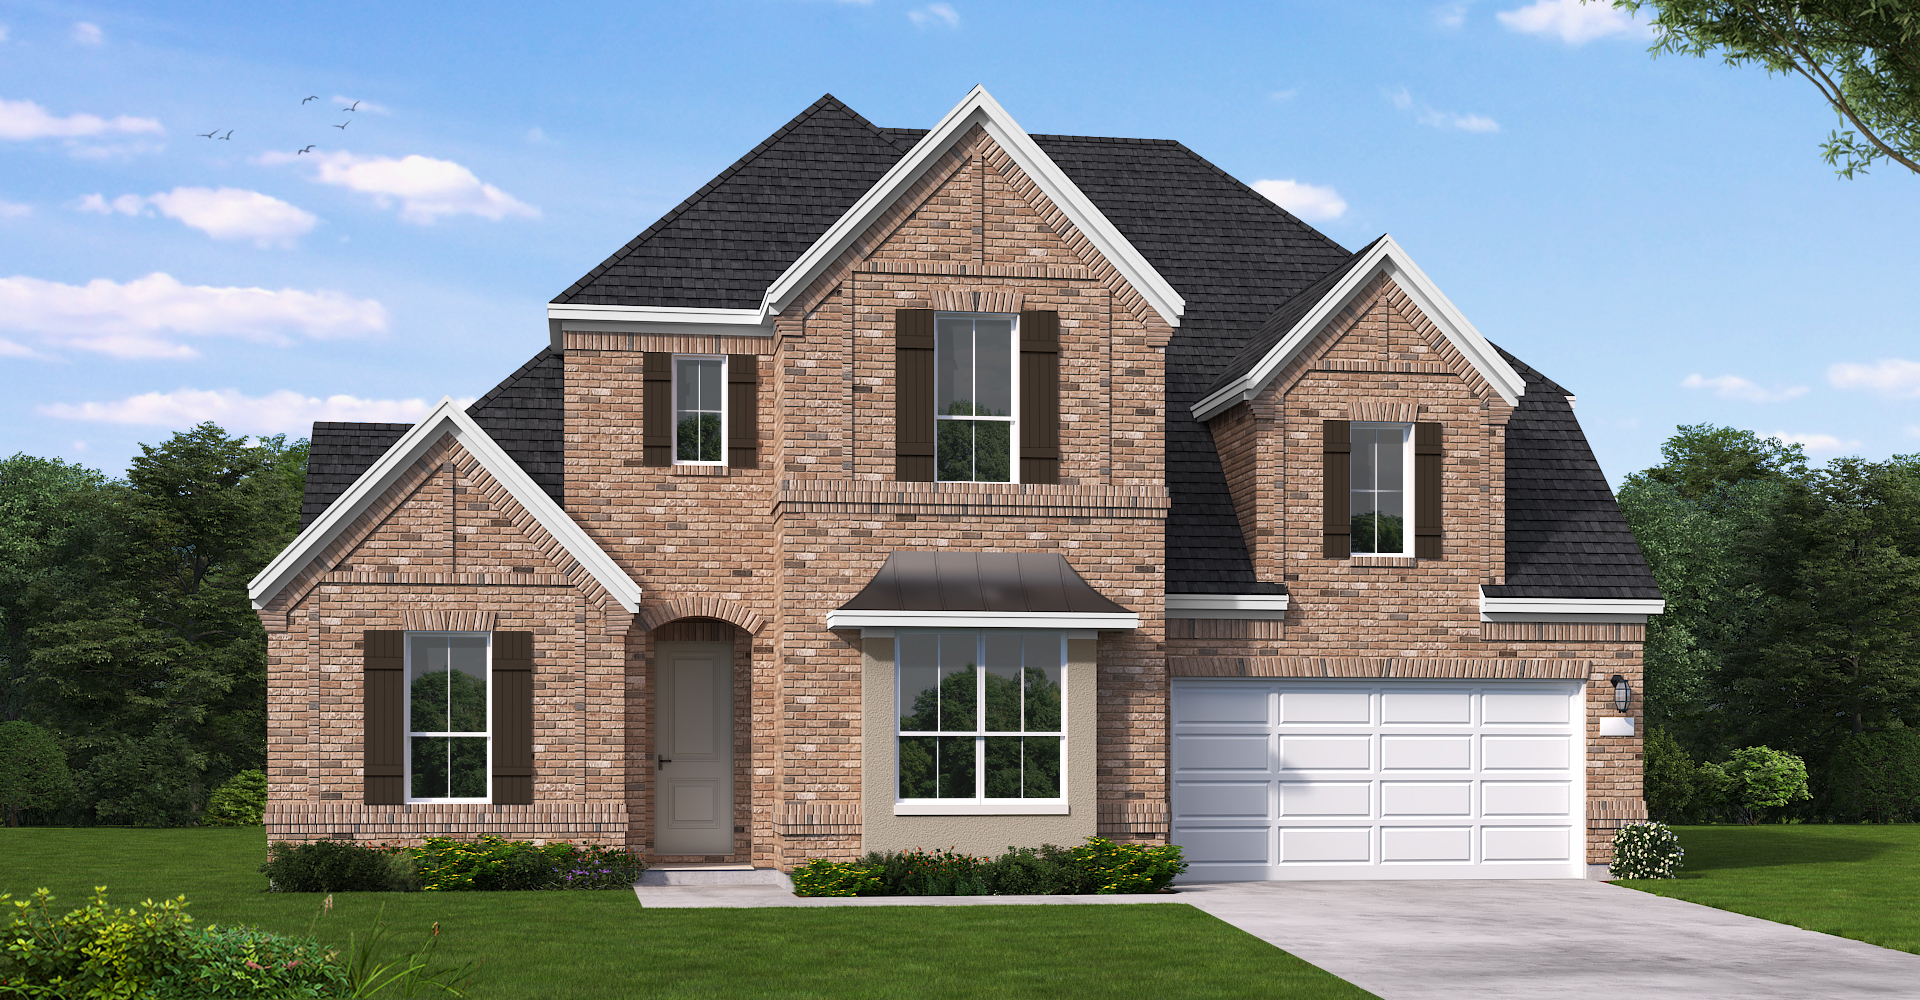 Coventry Homes Floor Plans - Coventry Homes For Sale | Sandbrock Ranch